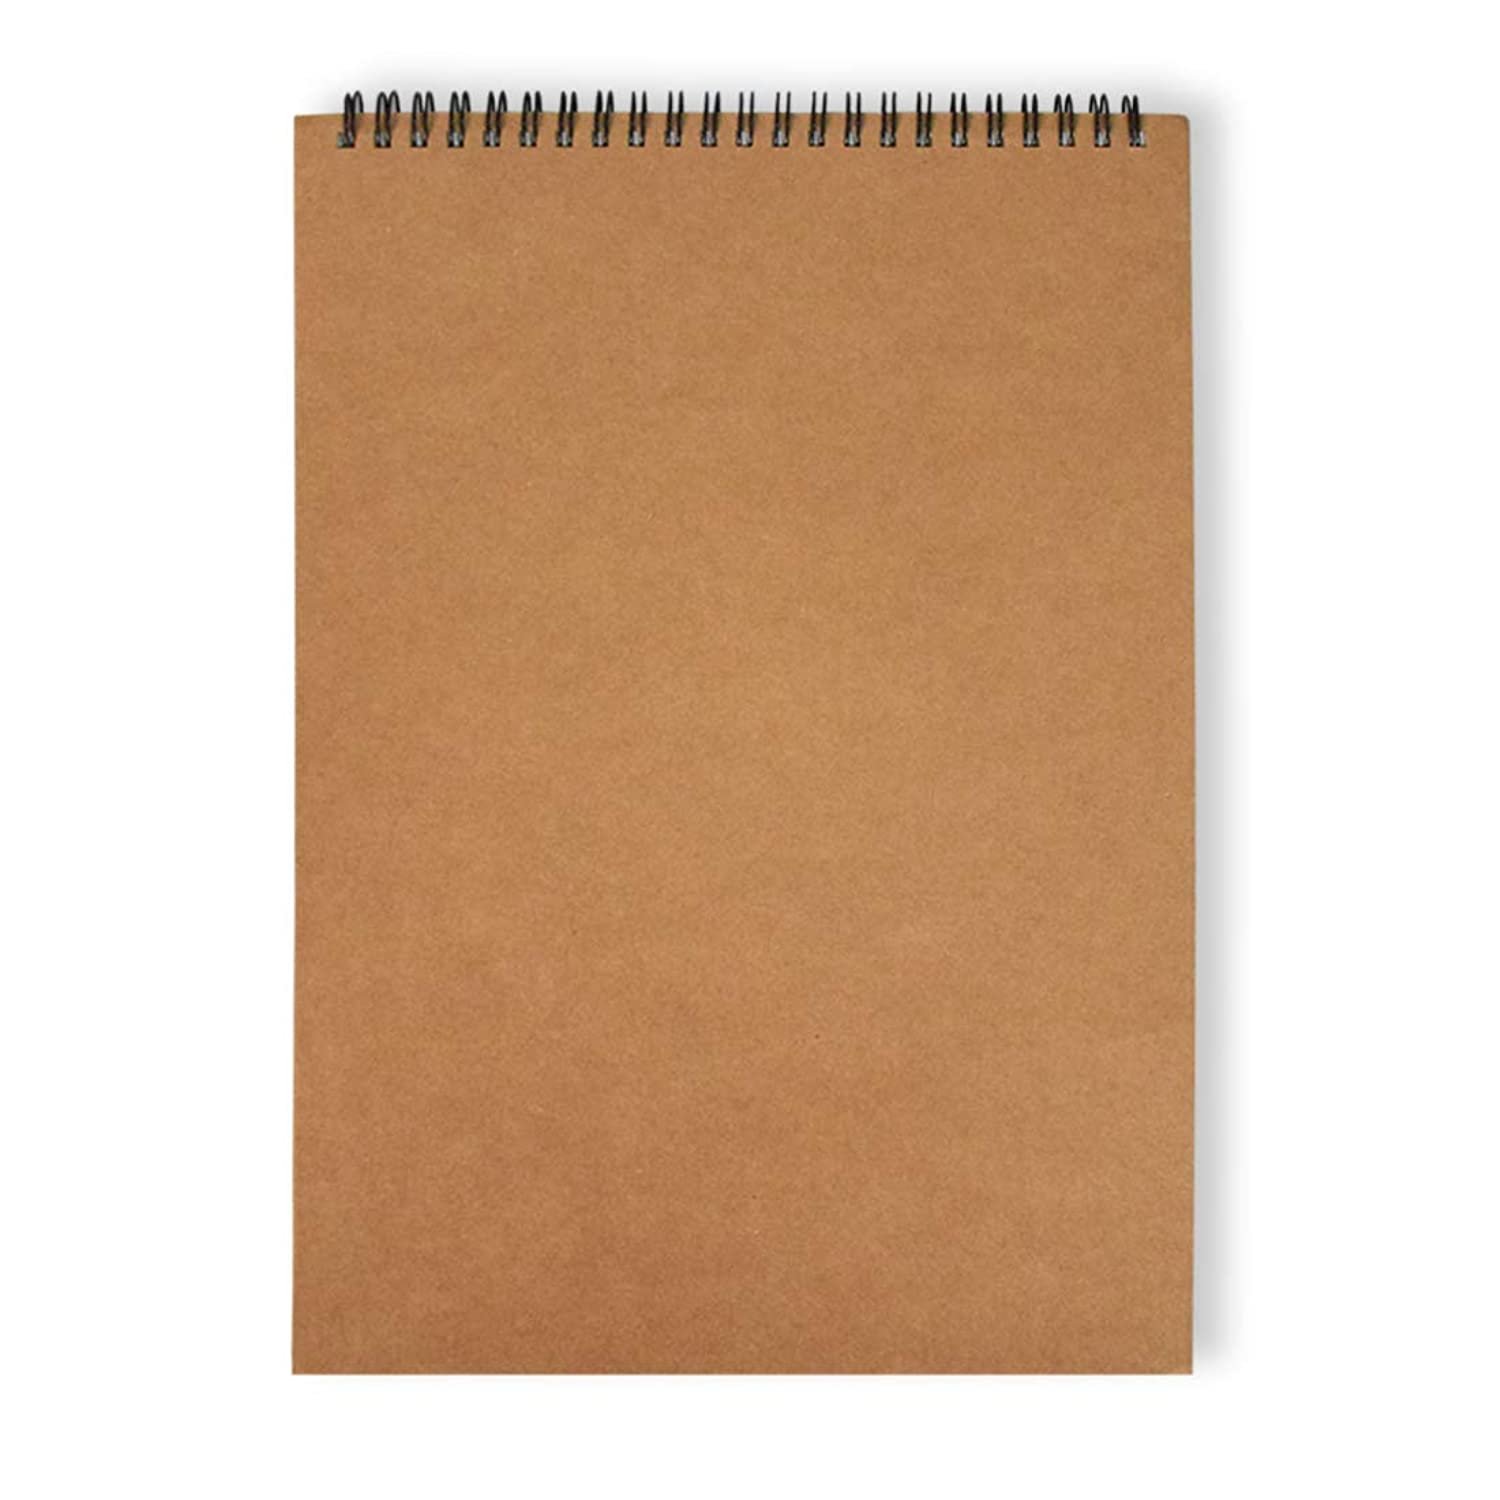 Professional Spiral Bound A4 Sketch Book Blank Artist Sketch Pad With Hardback Cover- 60